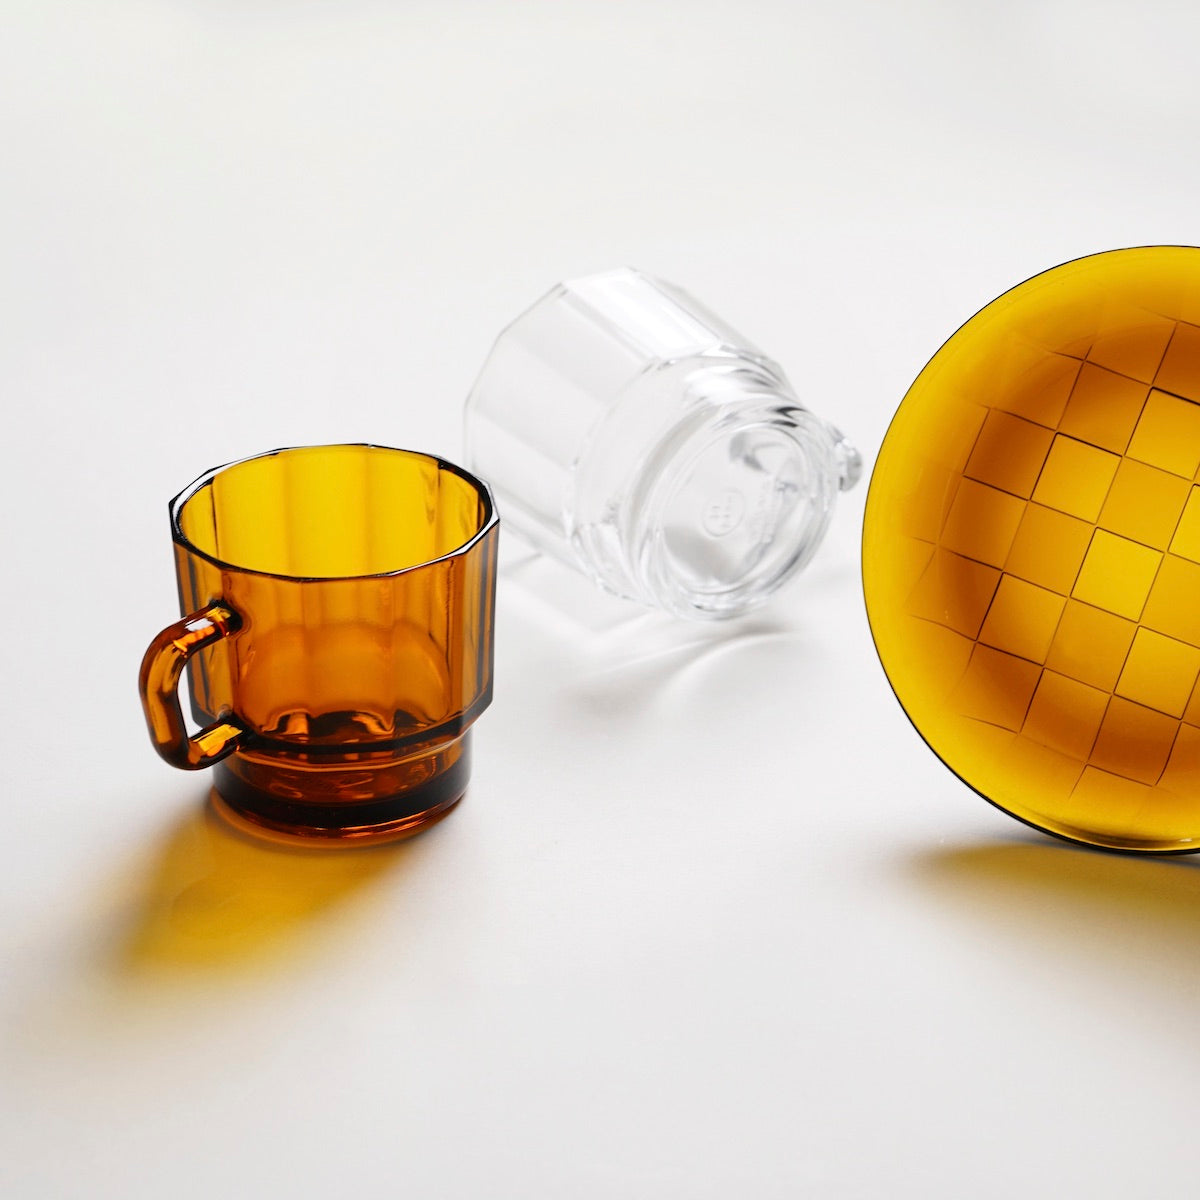 HMM W Glass Amber Lifestyle | THE COFFEE GOODS